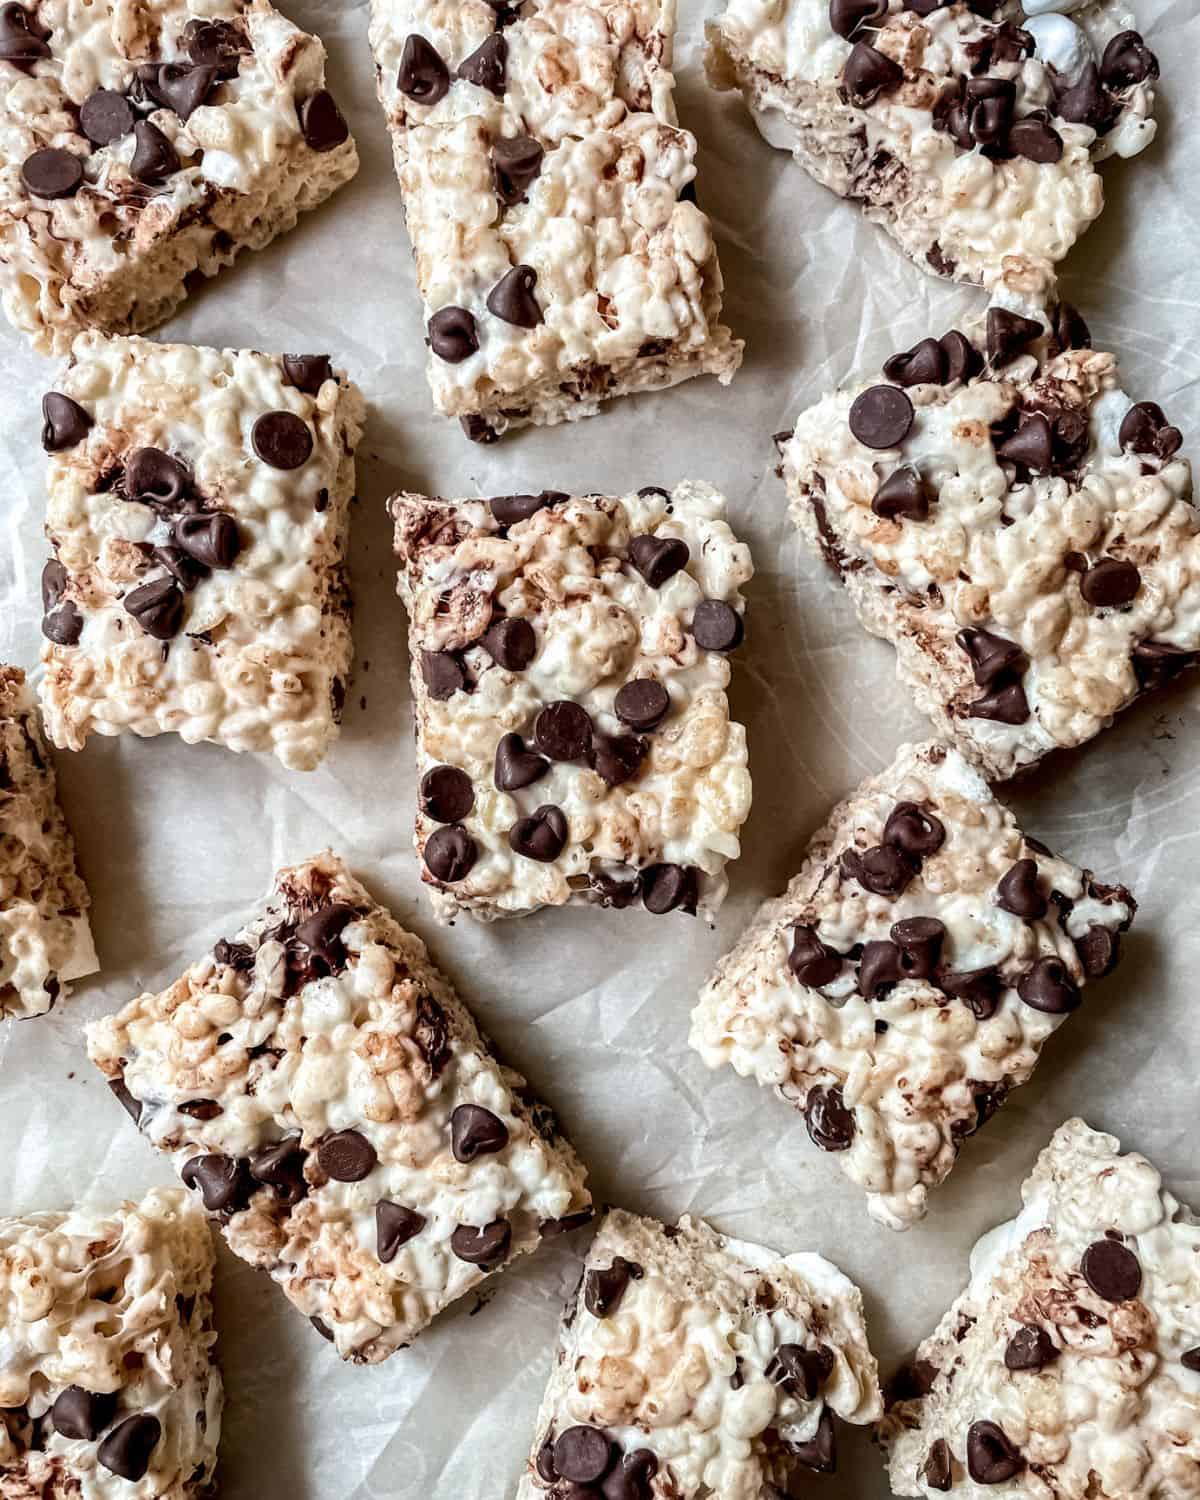 Rice krispies treats with chocolate chips cut into squares on parchment paper.